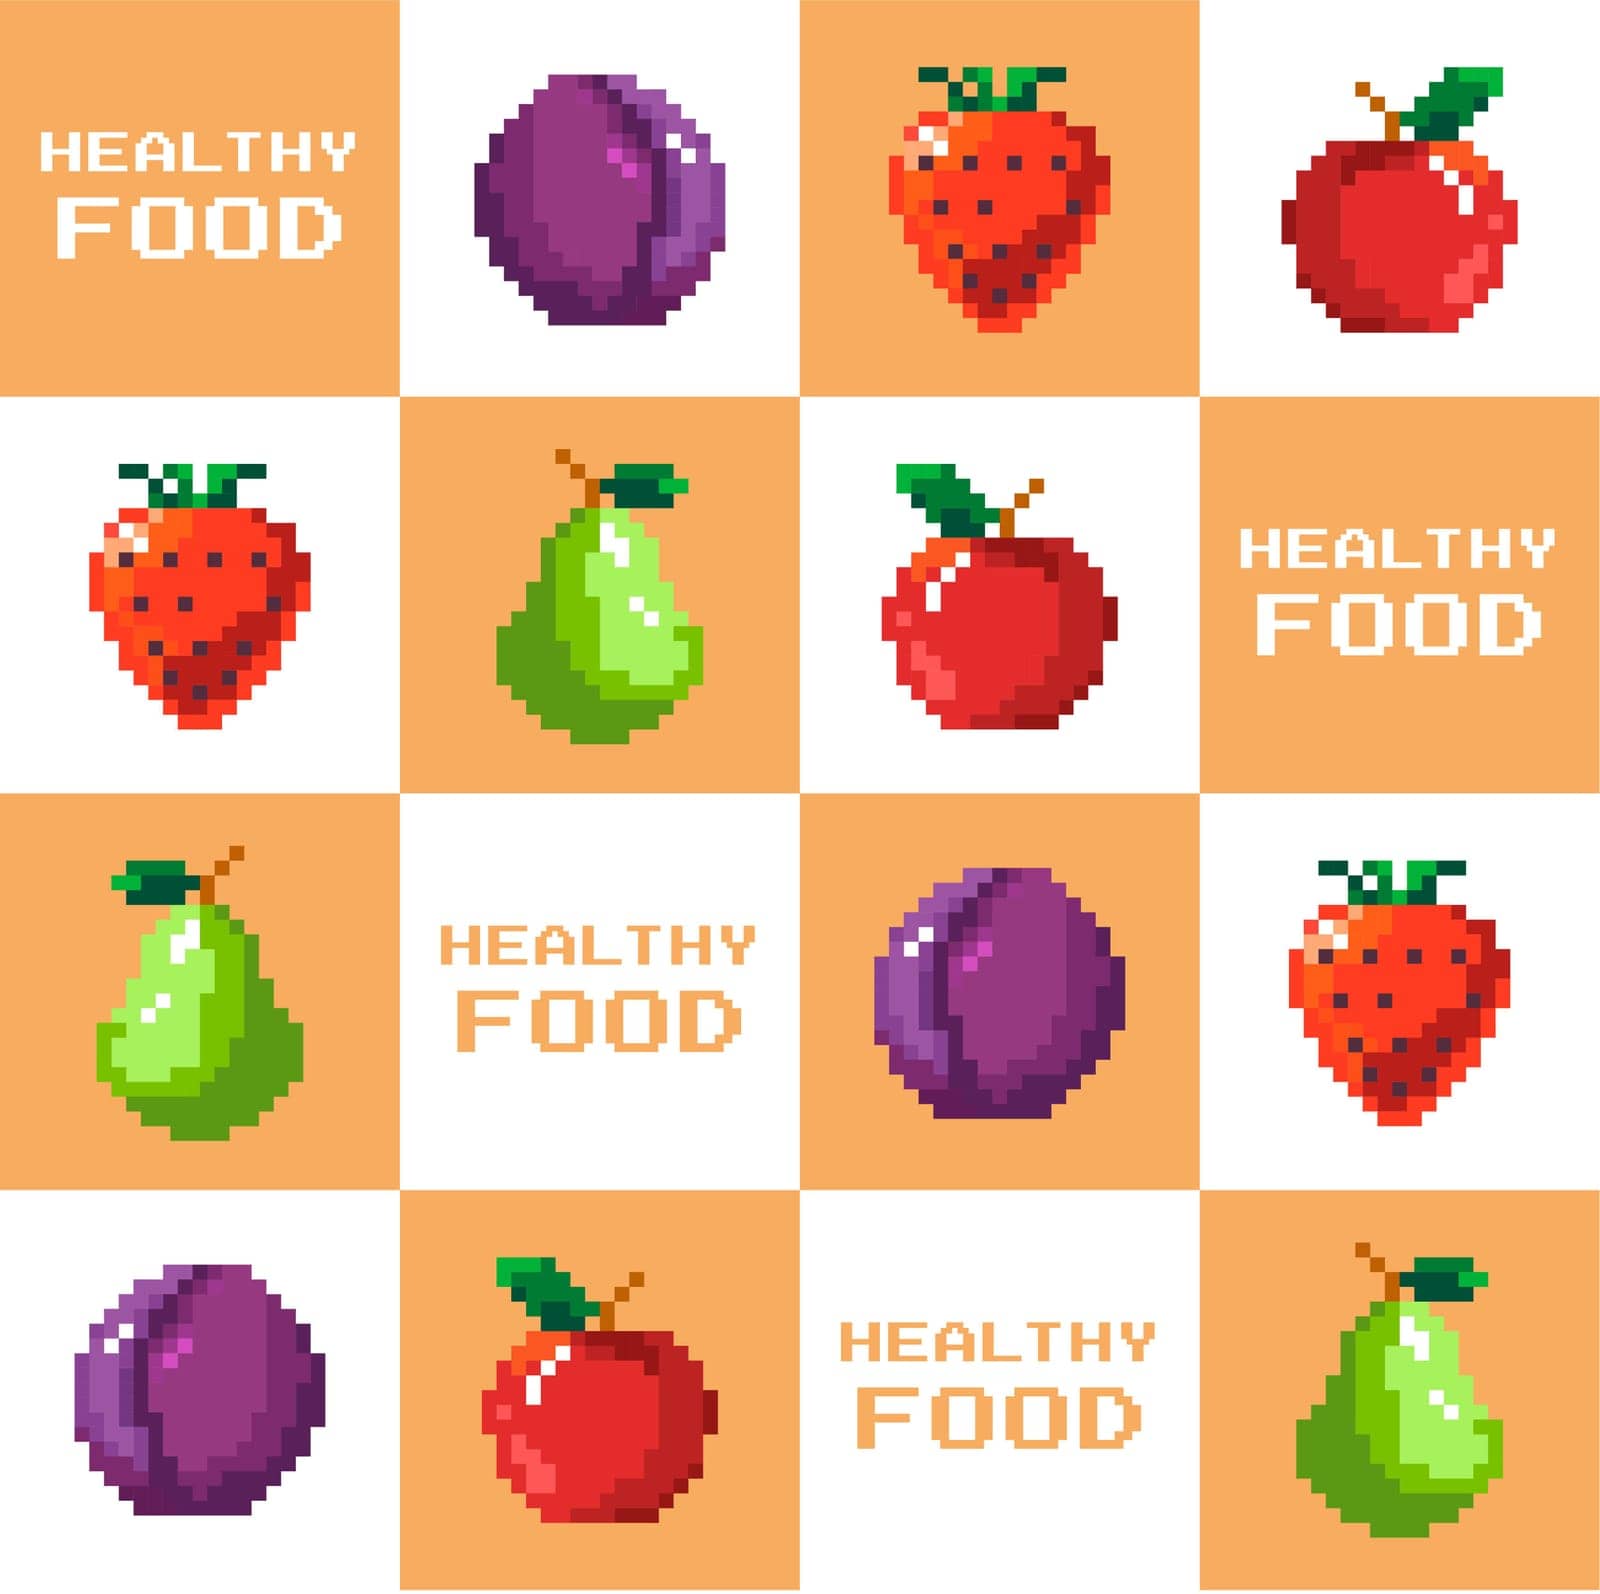 Fruit pixel art, tasty and ripe products, healthy food. Organic and natural ingredients for balanced nourishment and nutrition. Pixelated apples and pears, plums and strawberries. Vector in flat style